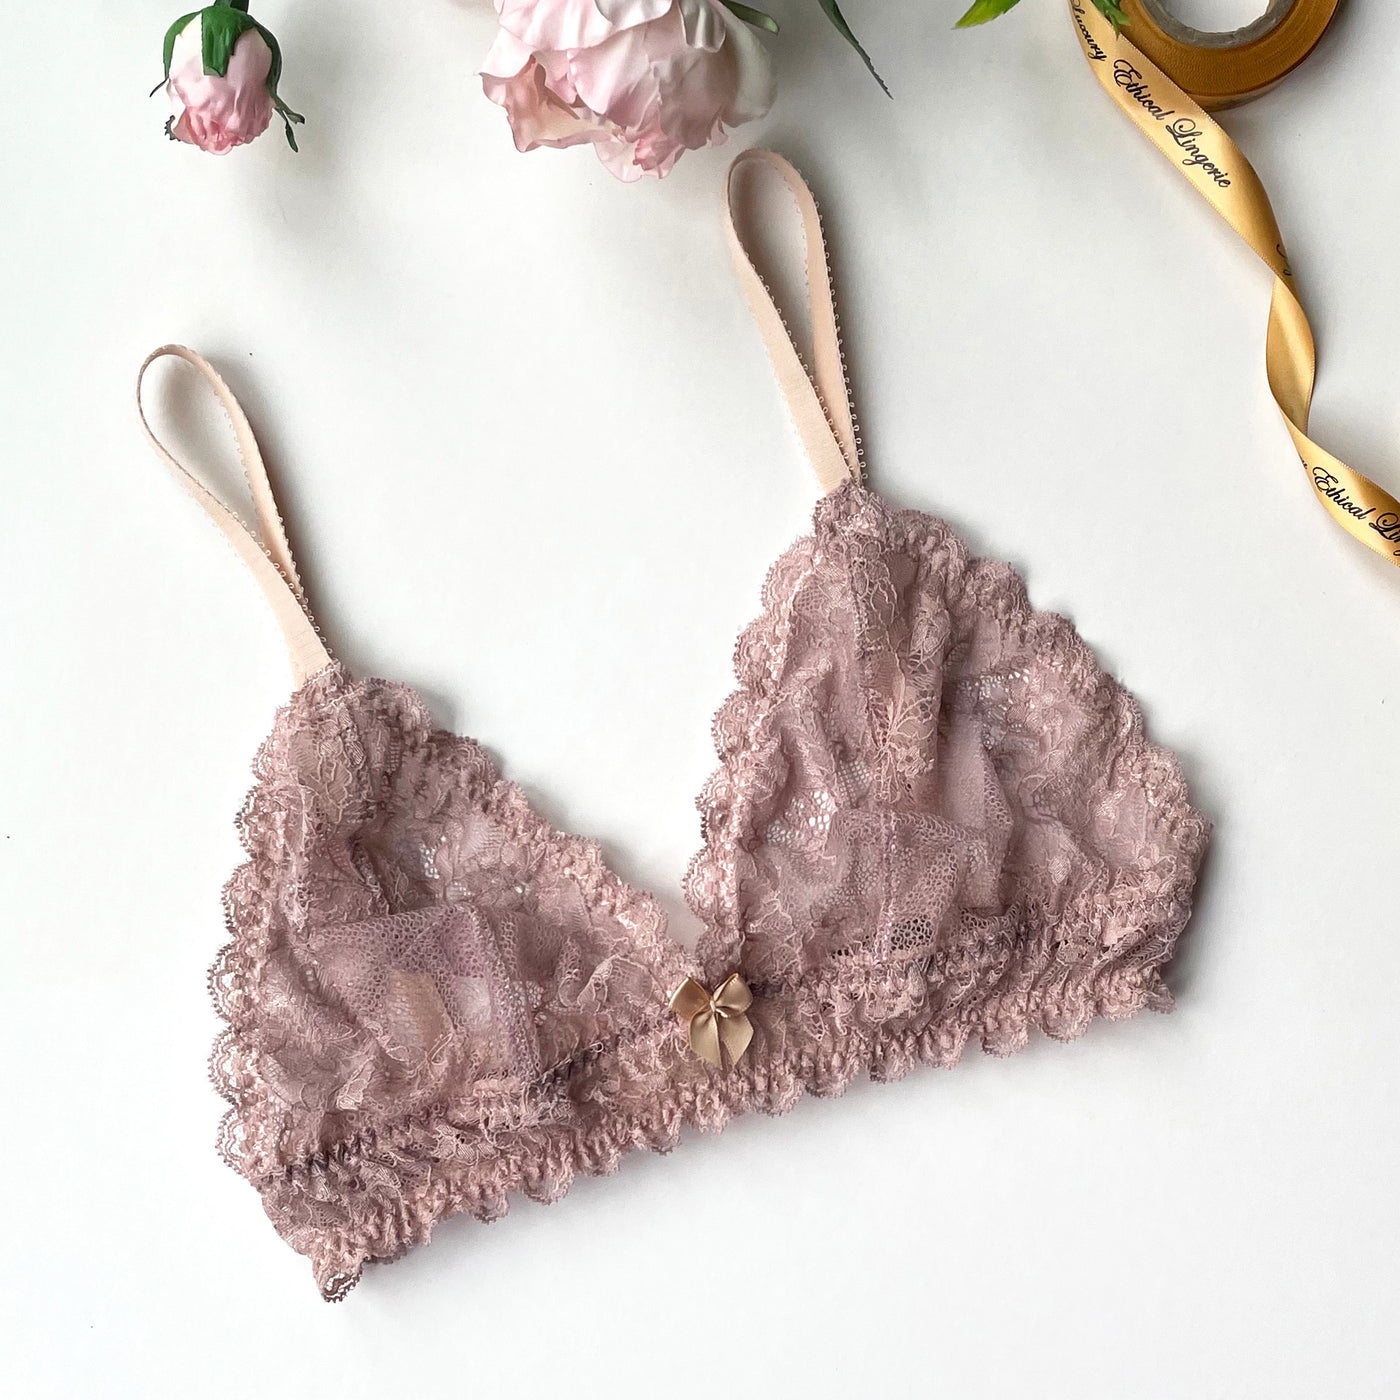 Marilyn Monroe Pale Pink Lace Intimate  Lace intimates, Pink lace, Clothes  design